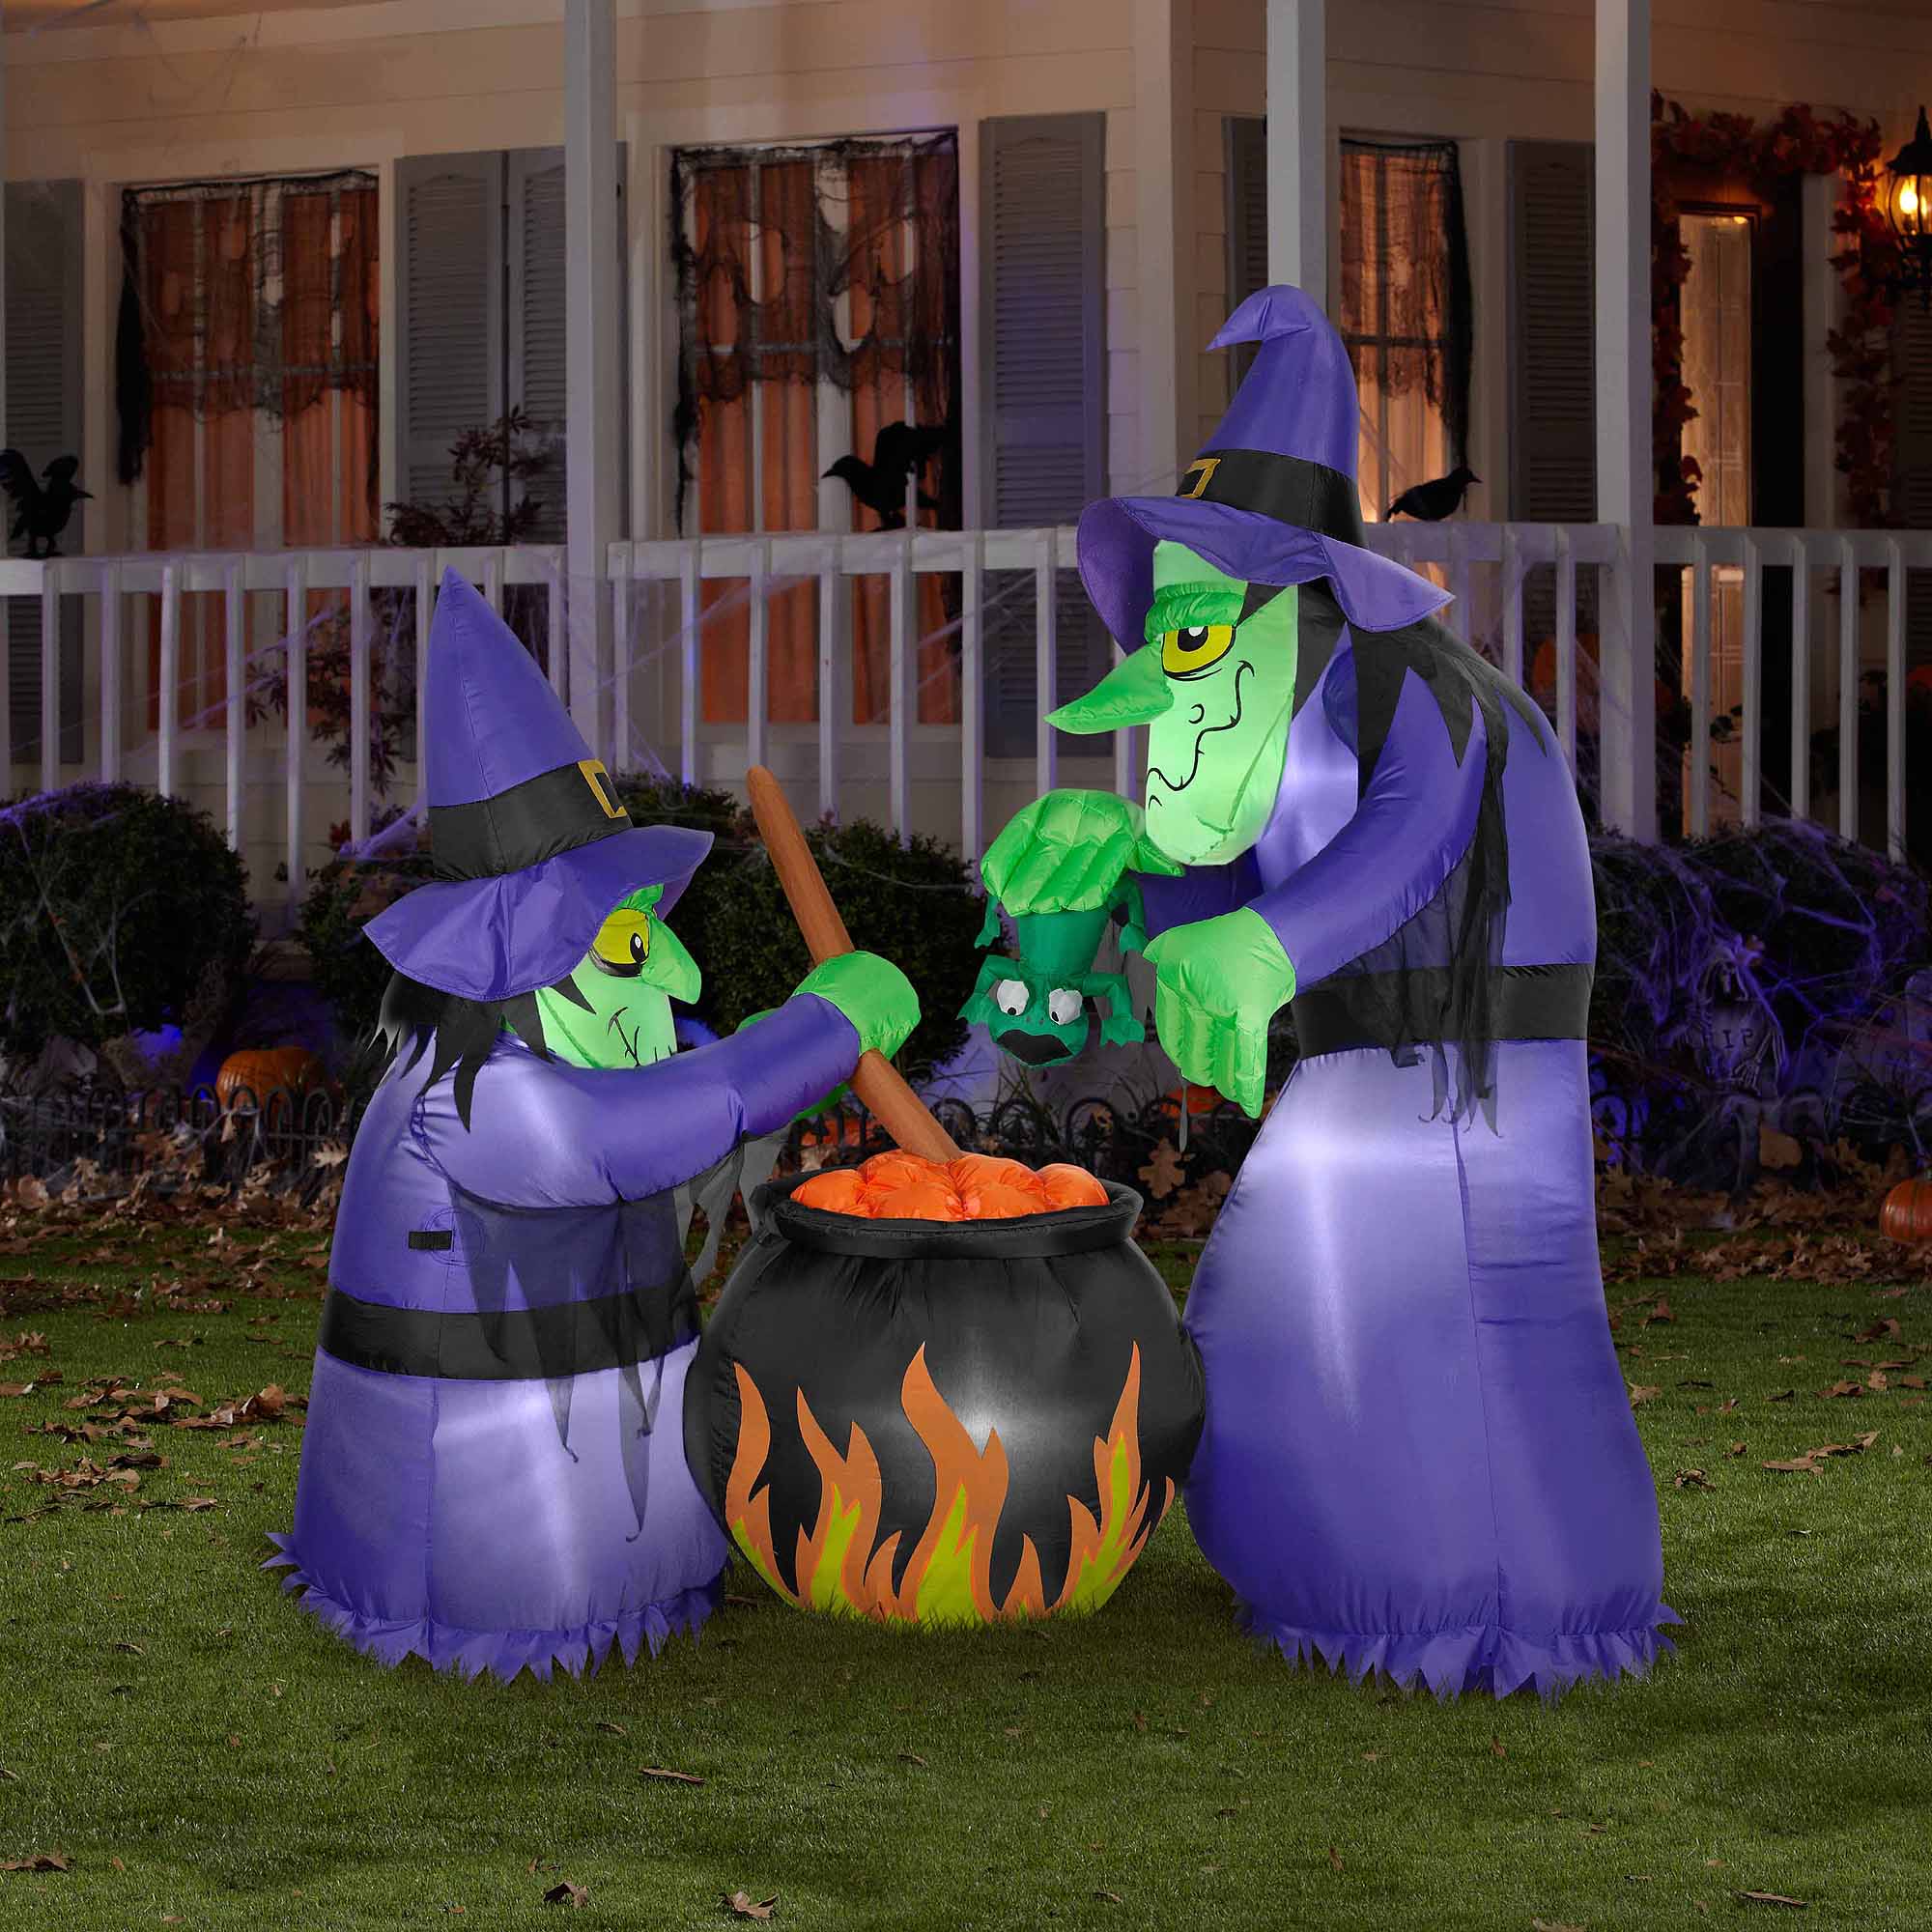 Gemmy 6 Feet H x 4 Feet W Airblown Halloween Inflatable Double Bubble Witches with Cauldron